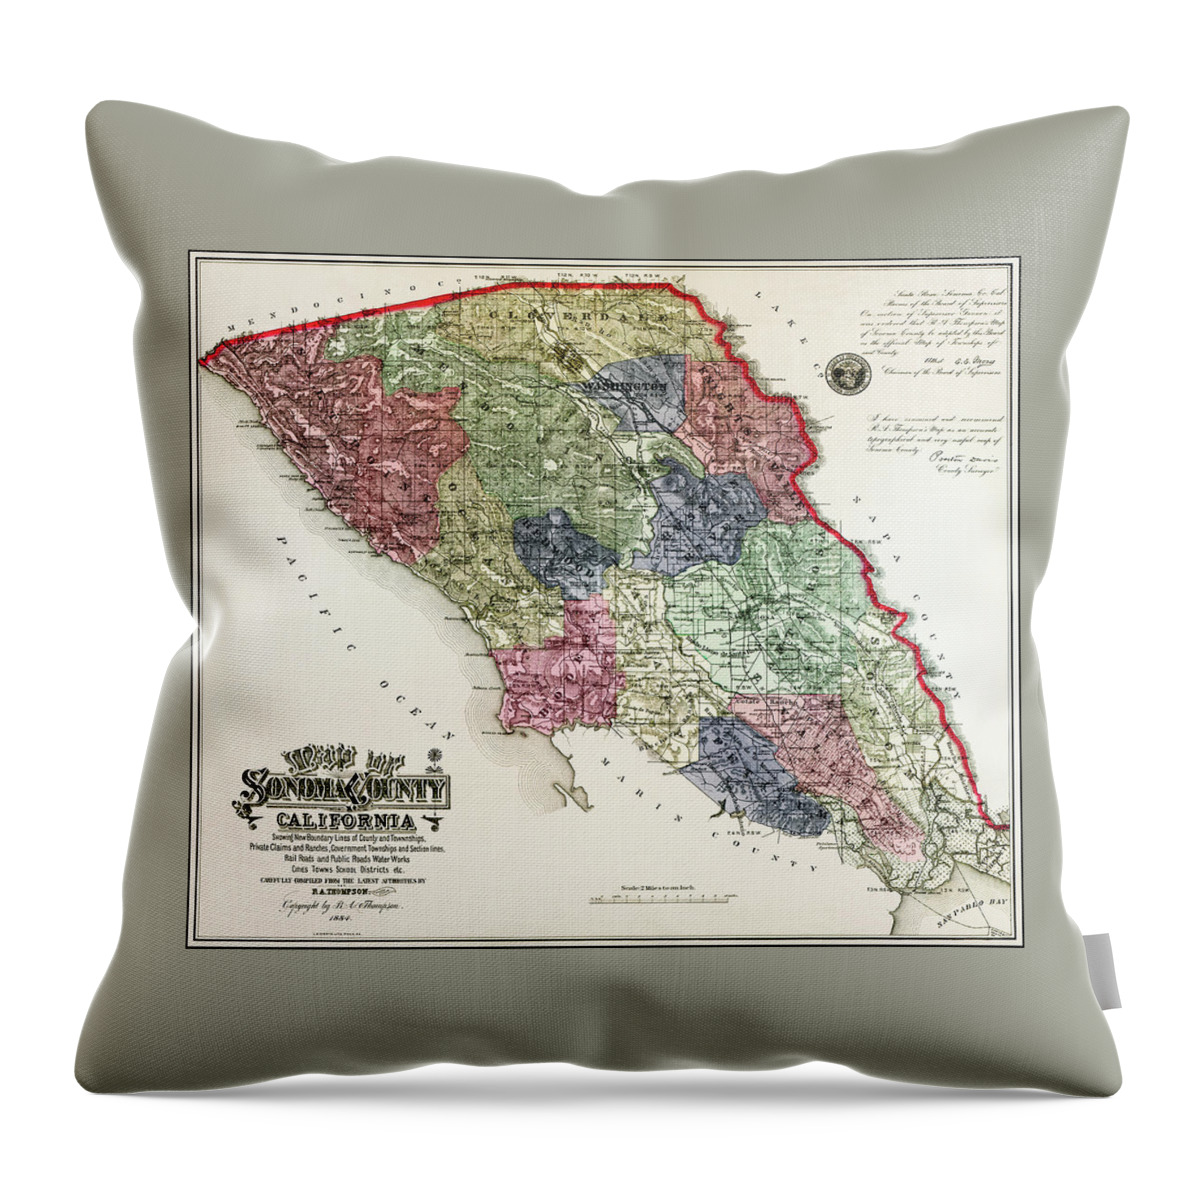 Sonoma County Throw Pillow featuring the photograph Sonoma County California Vintage Map 1884 by Carol Japp